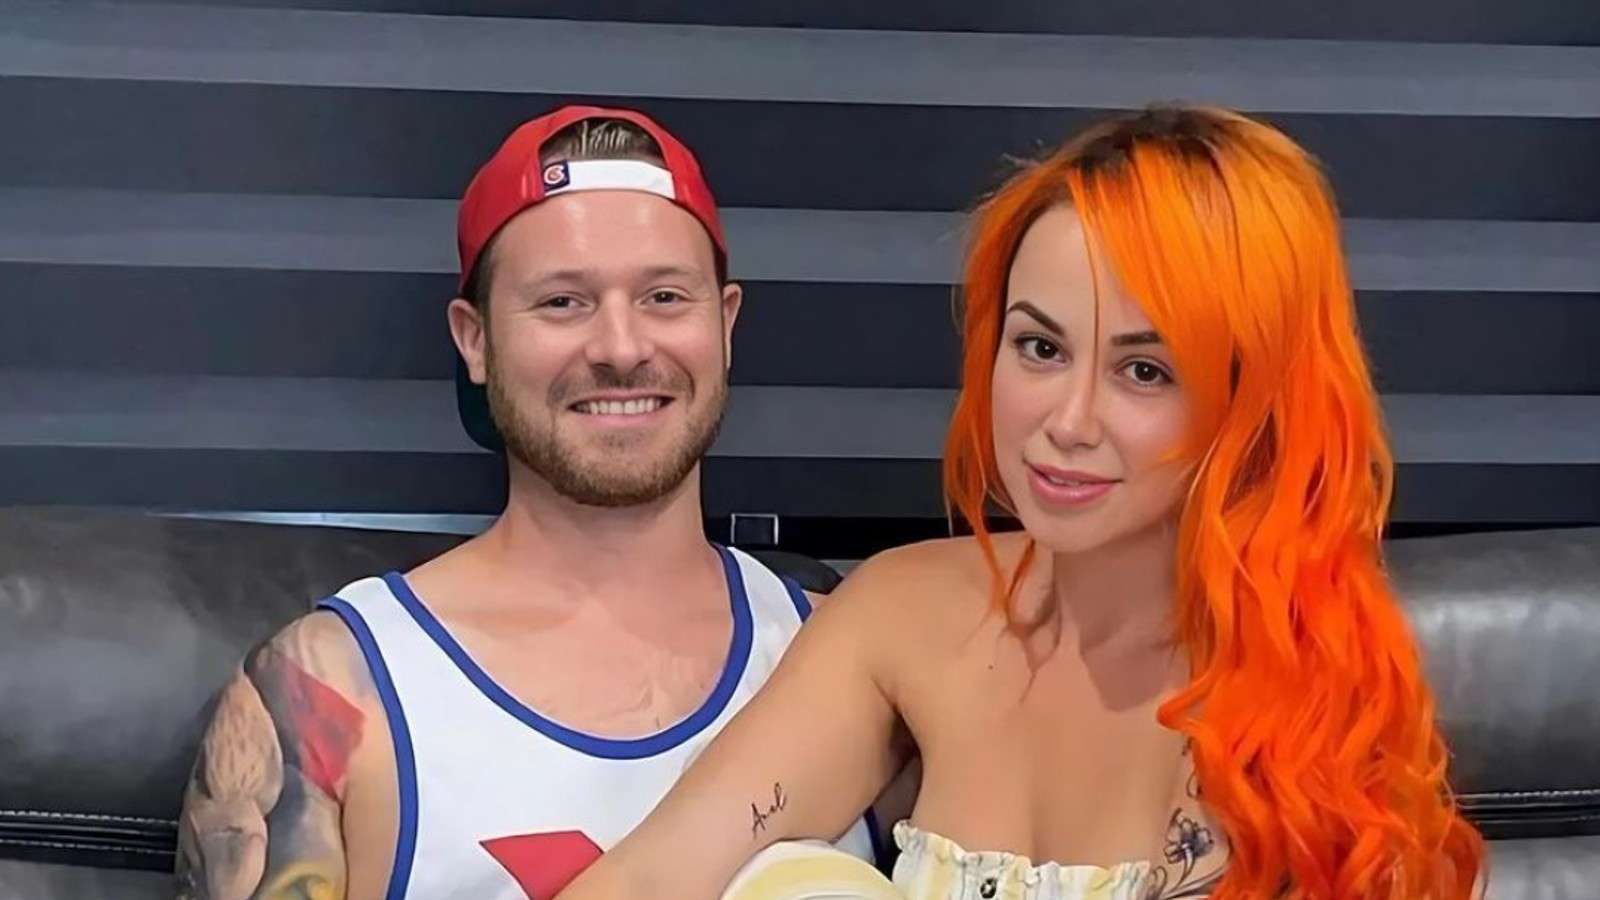 Russ and Paola Mayfield 90 Day Fiance